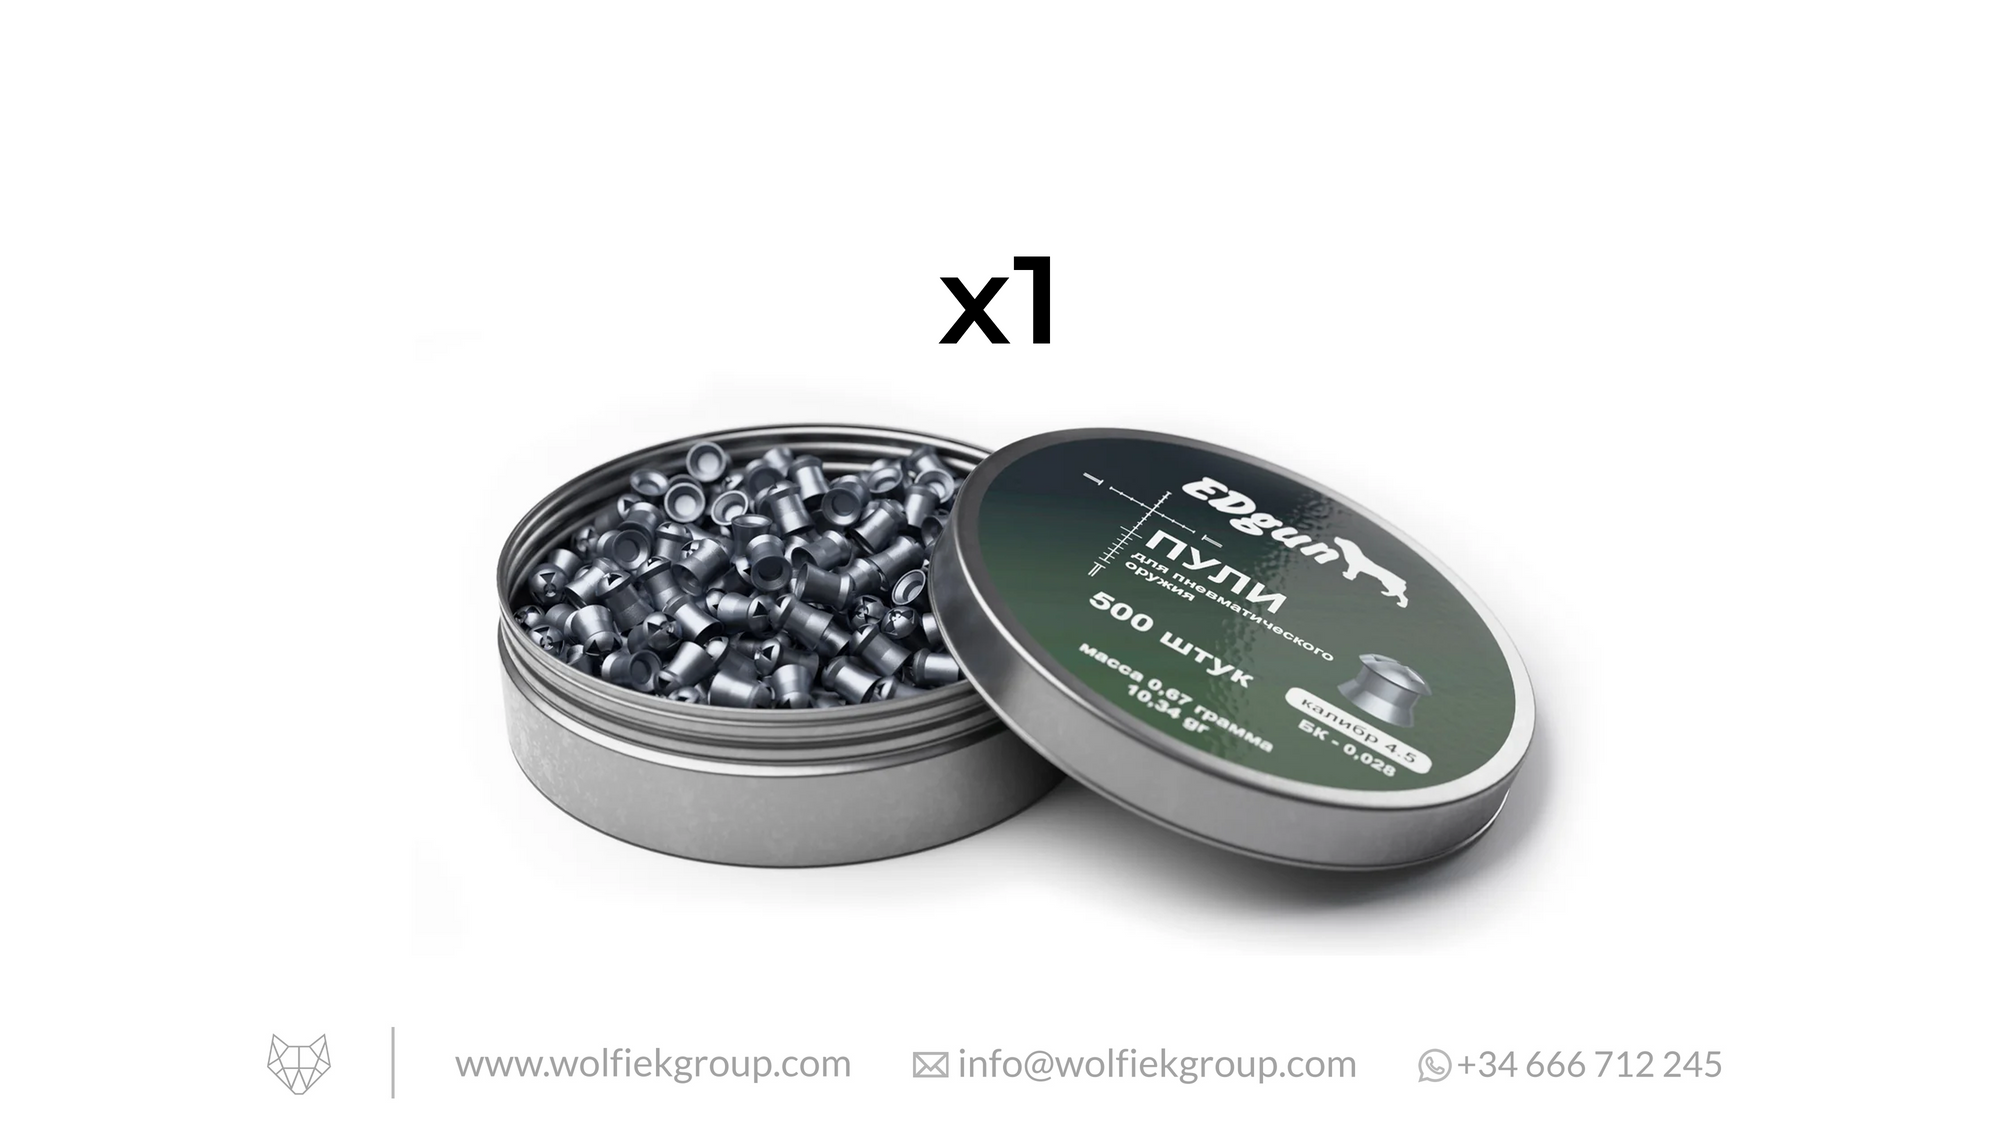 EDgun Hades Pellets Cal .177 (4,52mm) Weight 0,67g (10,34gr) with text buy 4 get 1 for free